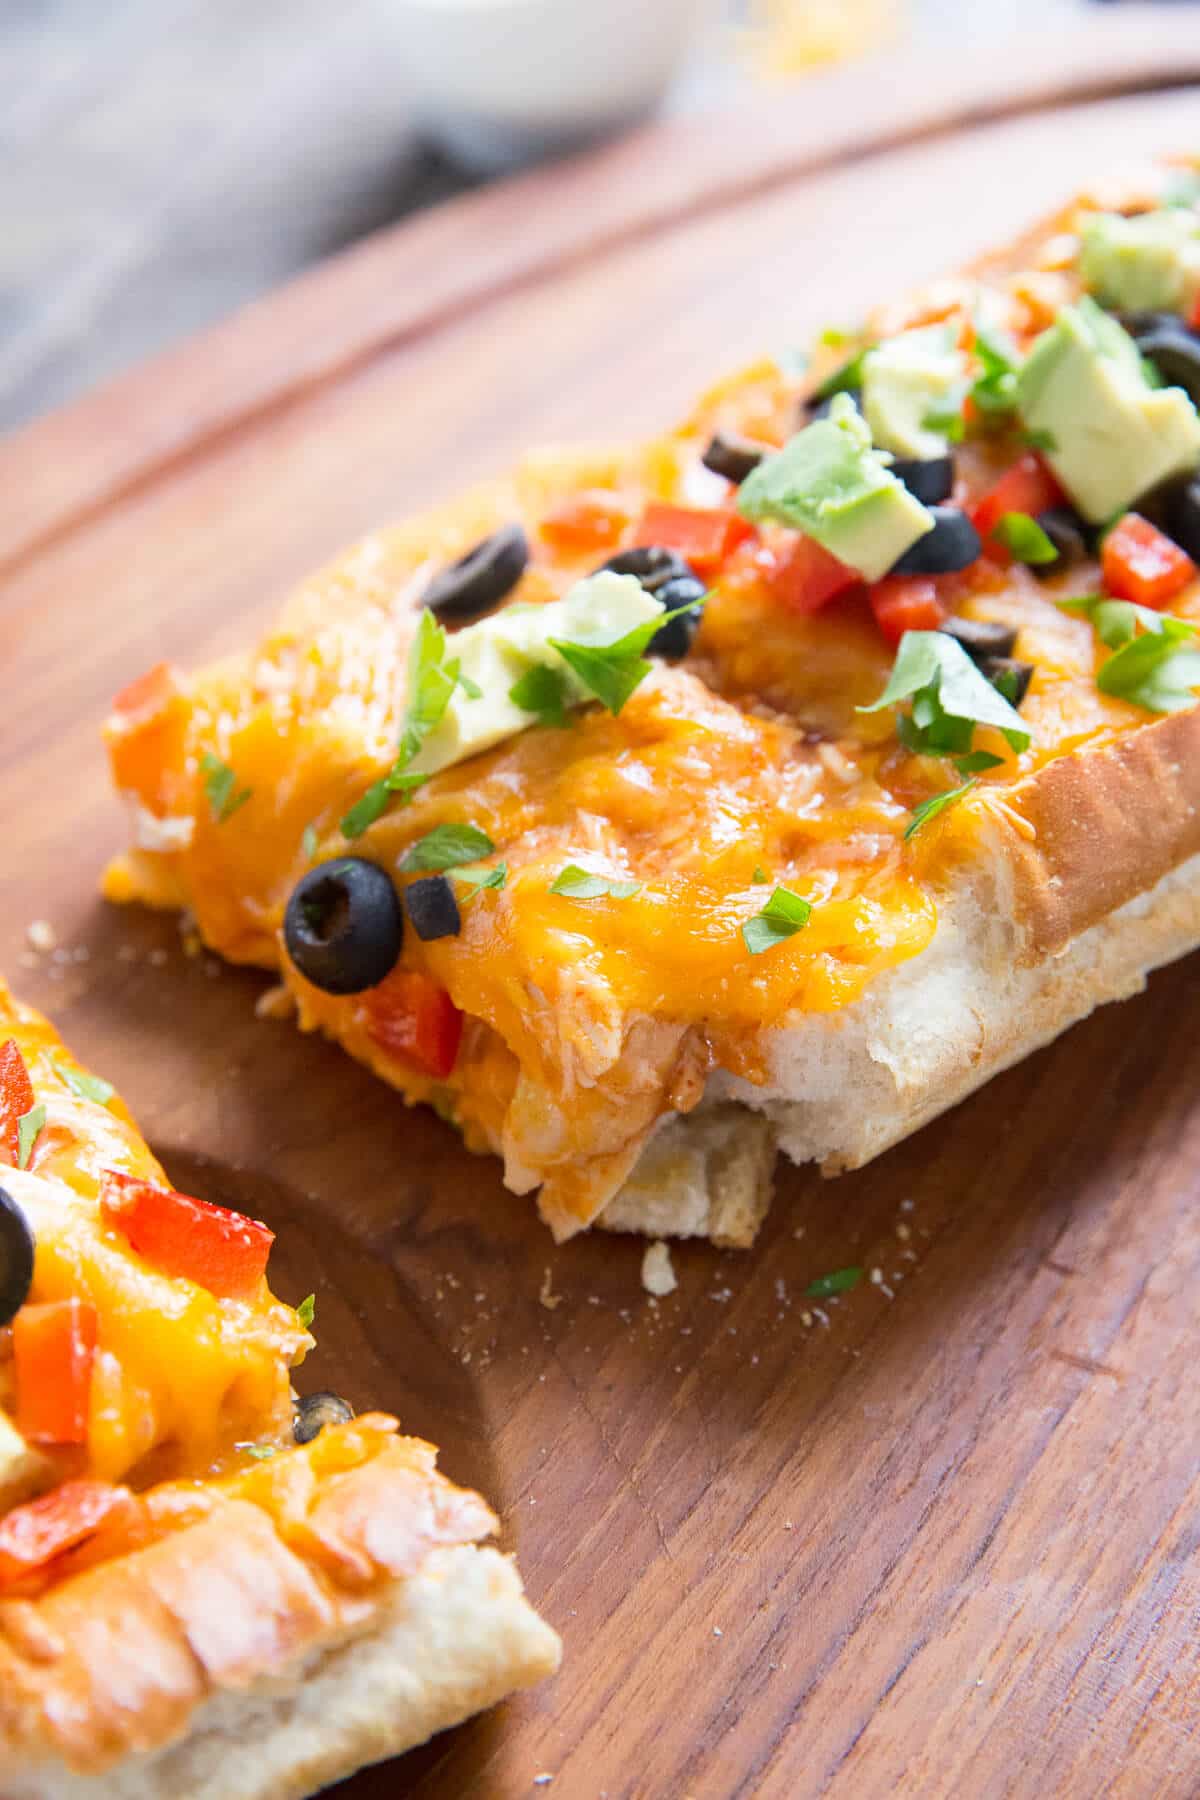 Love chicken enchiladas? This stuffed bread is a must try!